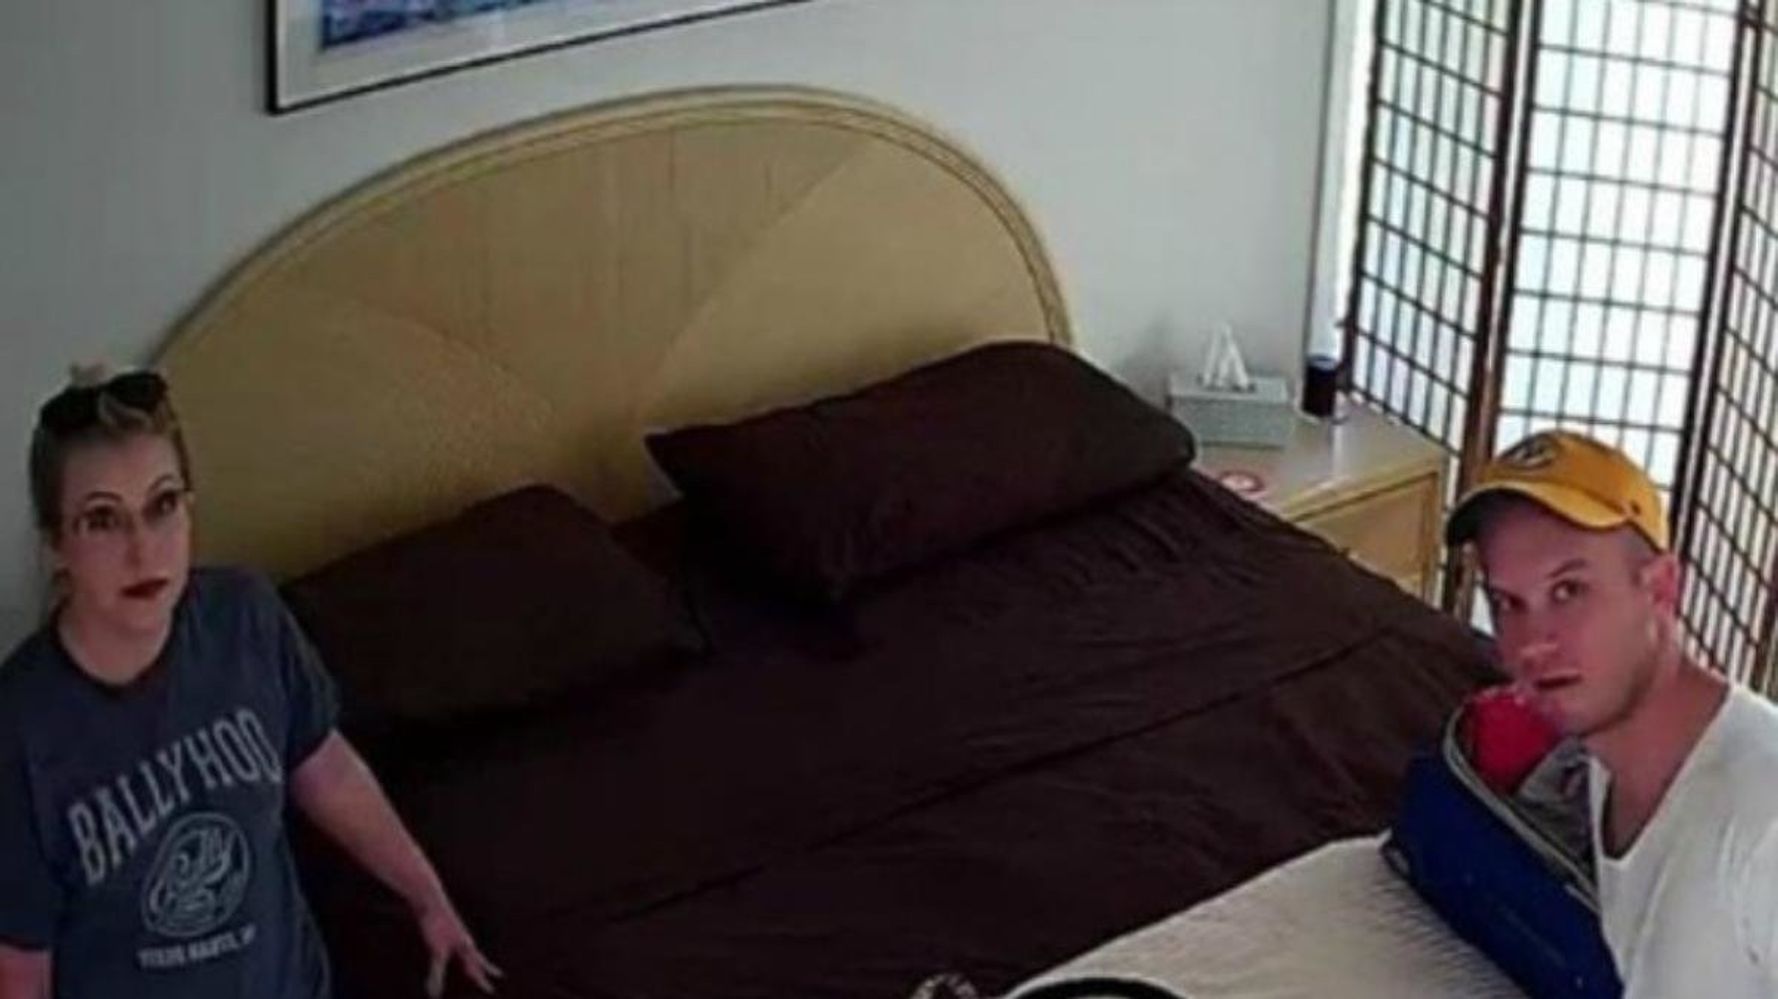 Beach Voyeur Spy Cam - Couple Uncovers Hidden Cameras In Nightmare Airbnb Stay: Police | HuffPost  Latest News